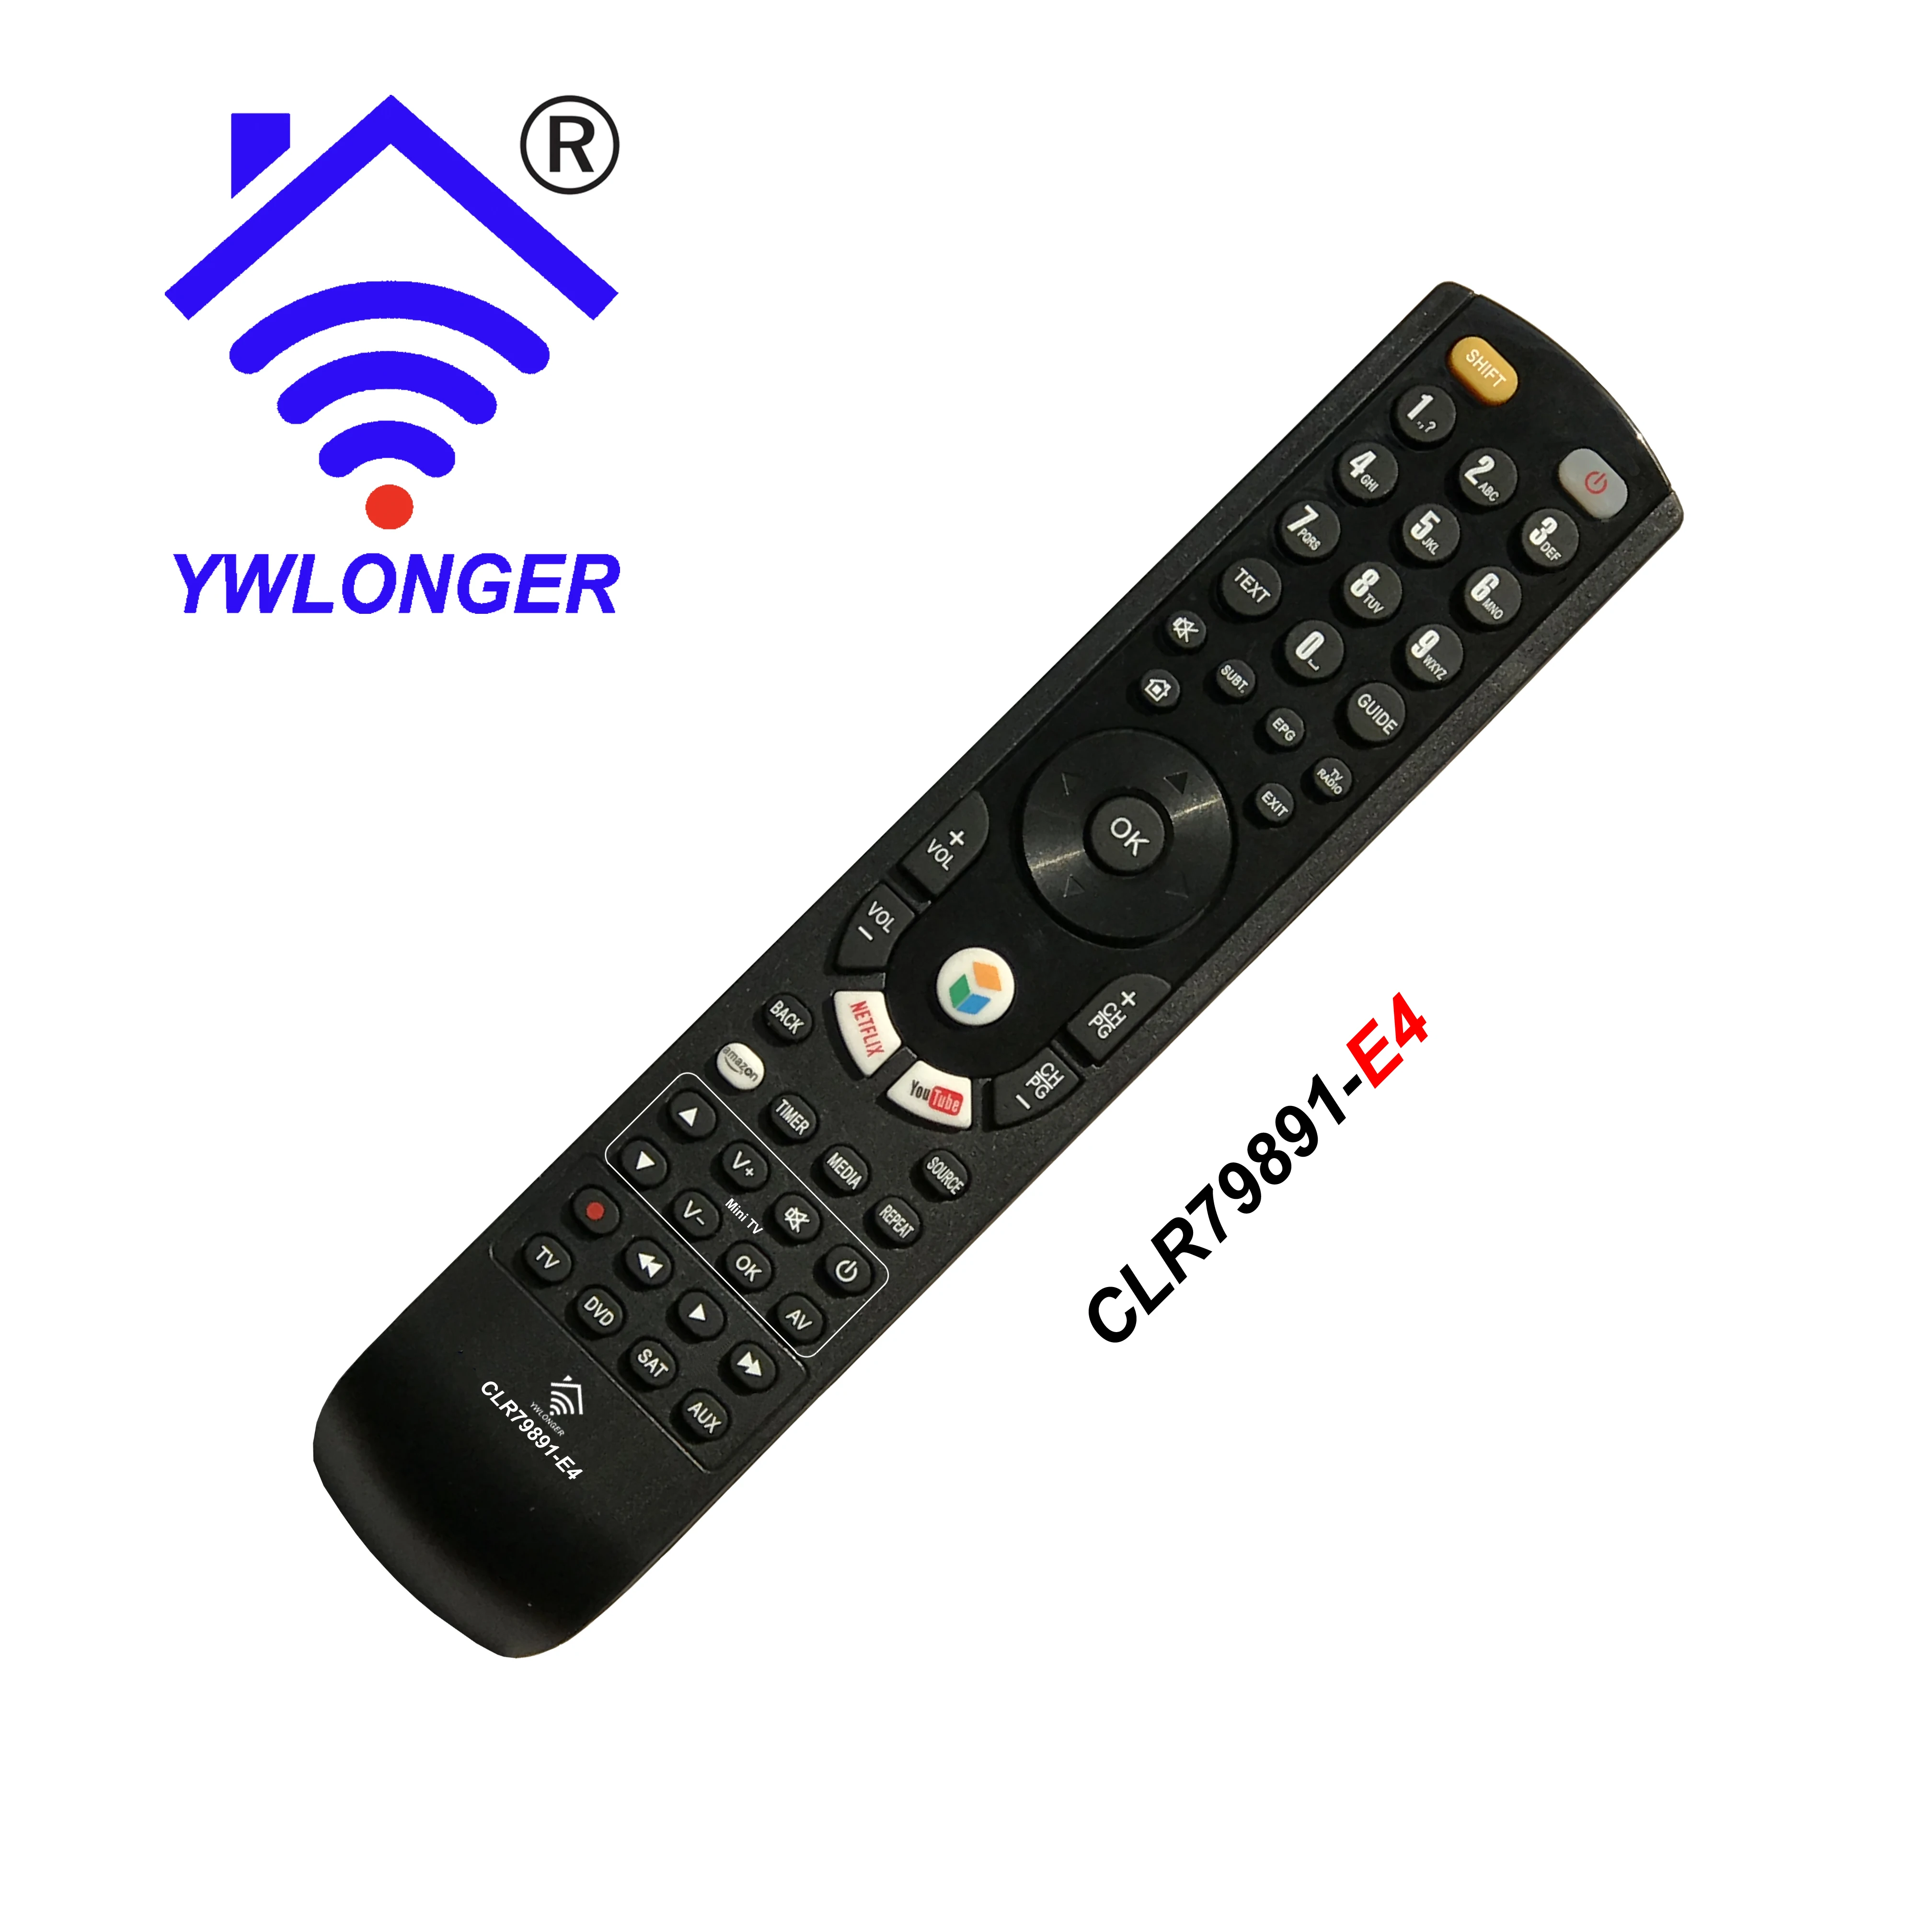 

DUPLICATE IR REMOTE CONTRO CLR79891, CONTAIN NETFLIX, AMAZON,YOUTUBE, PROGRAMMED BY PC/PHONE, REPLACE ALL REMOTE CONTROL